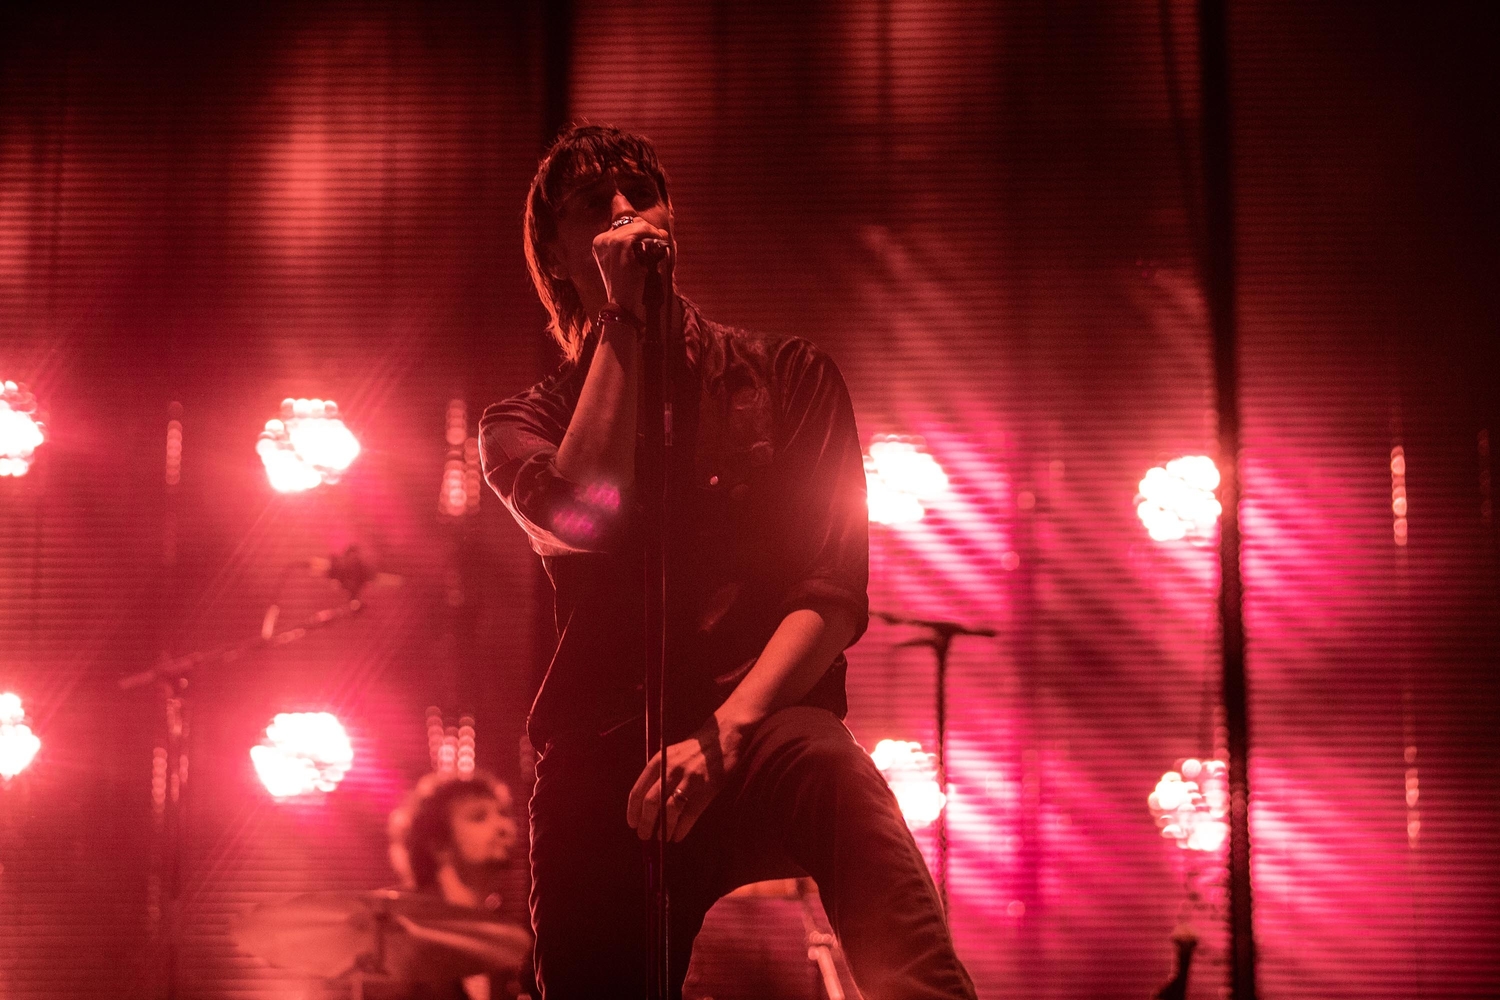 The Strokes tease brand new project…